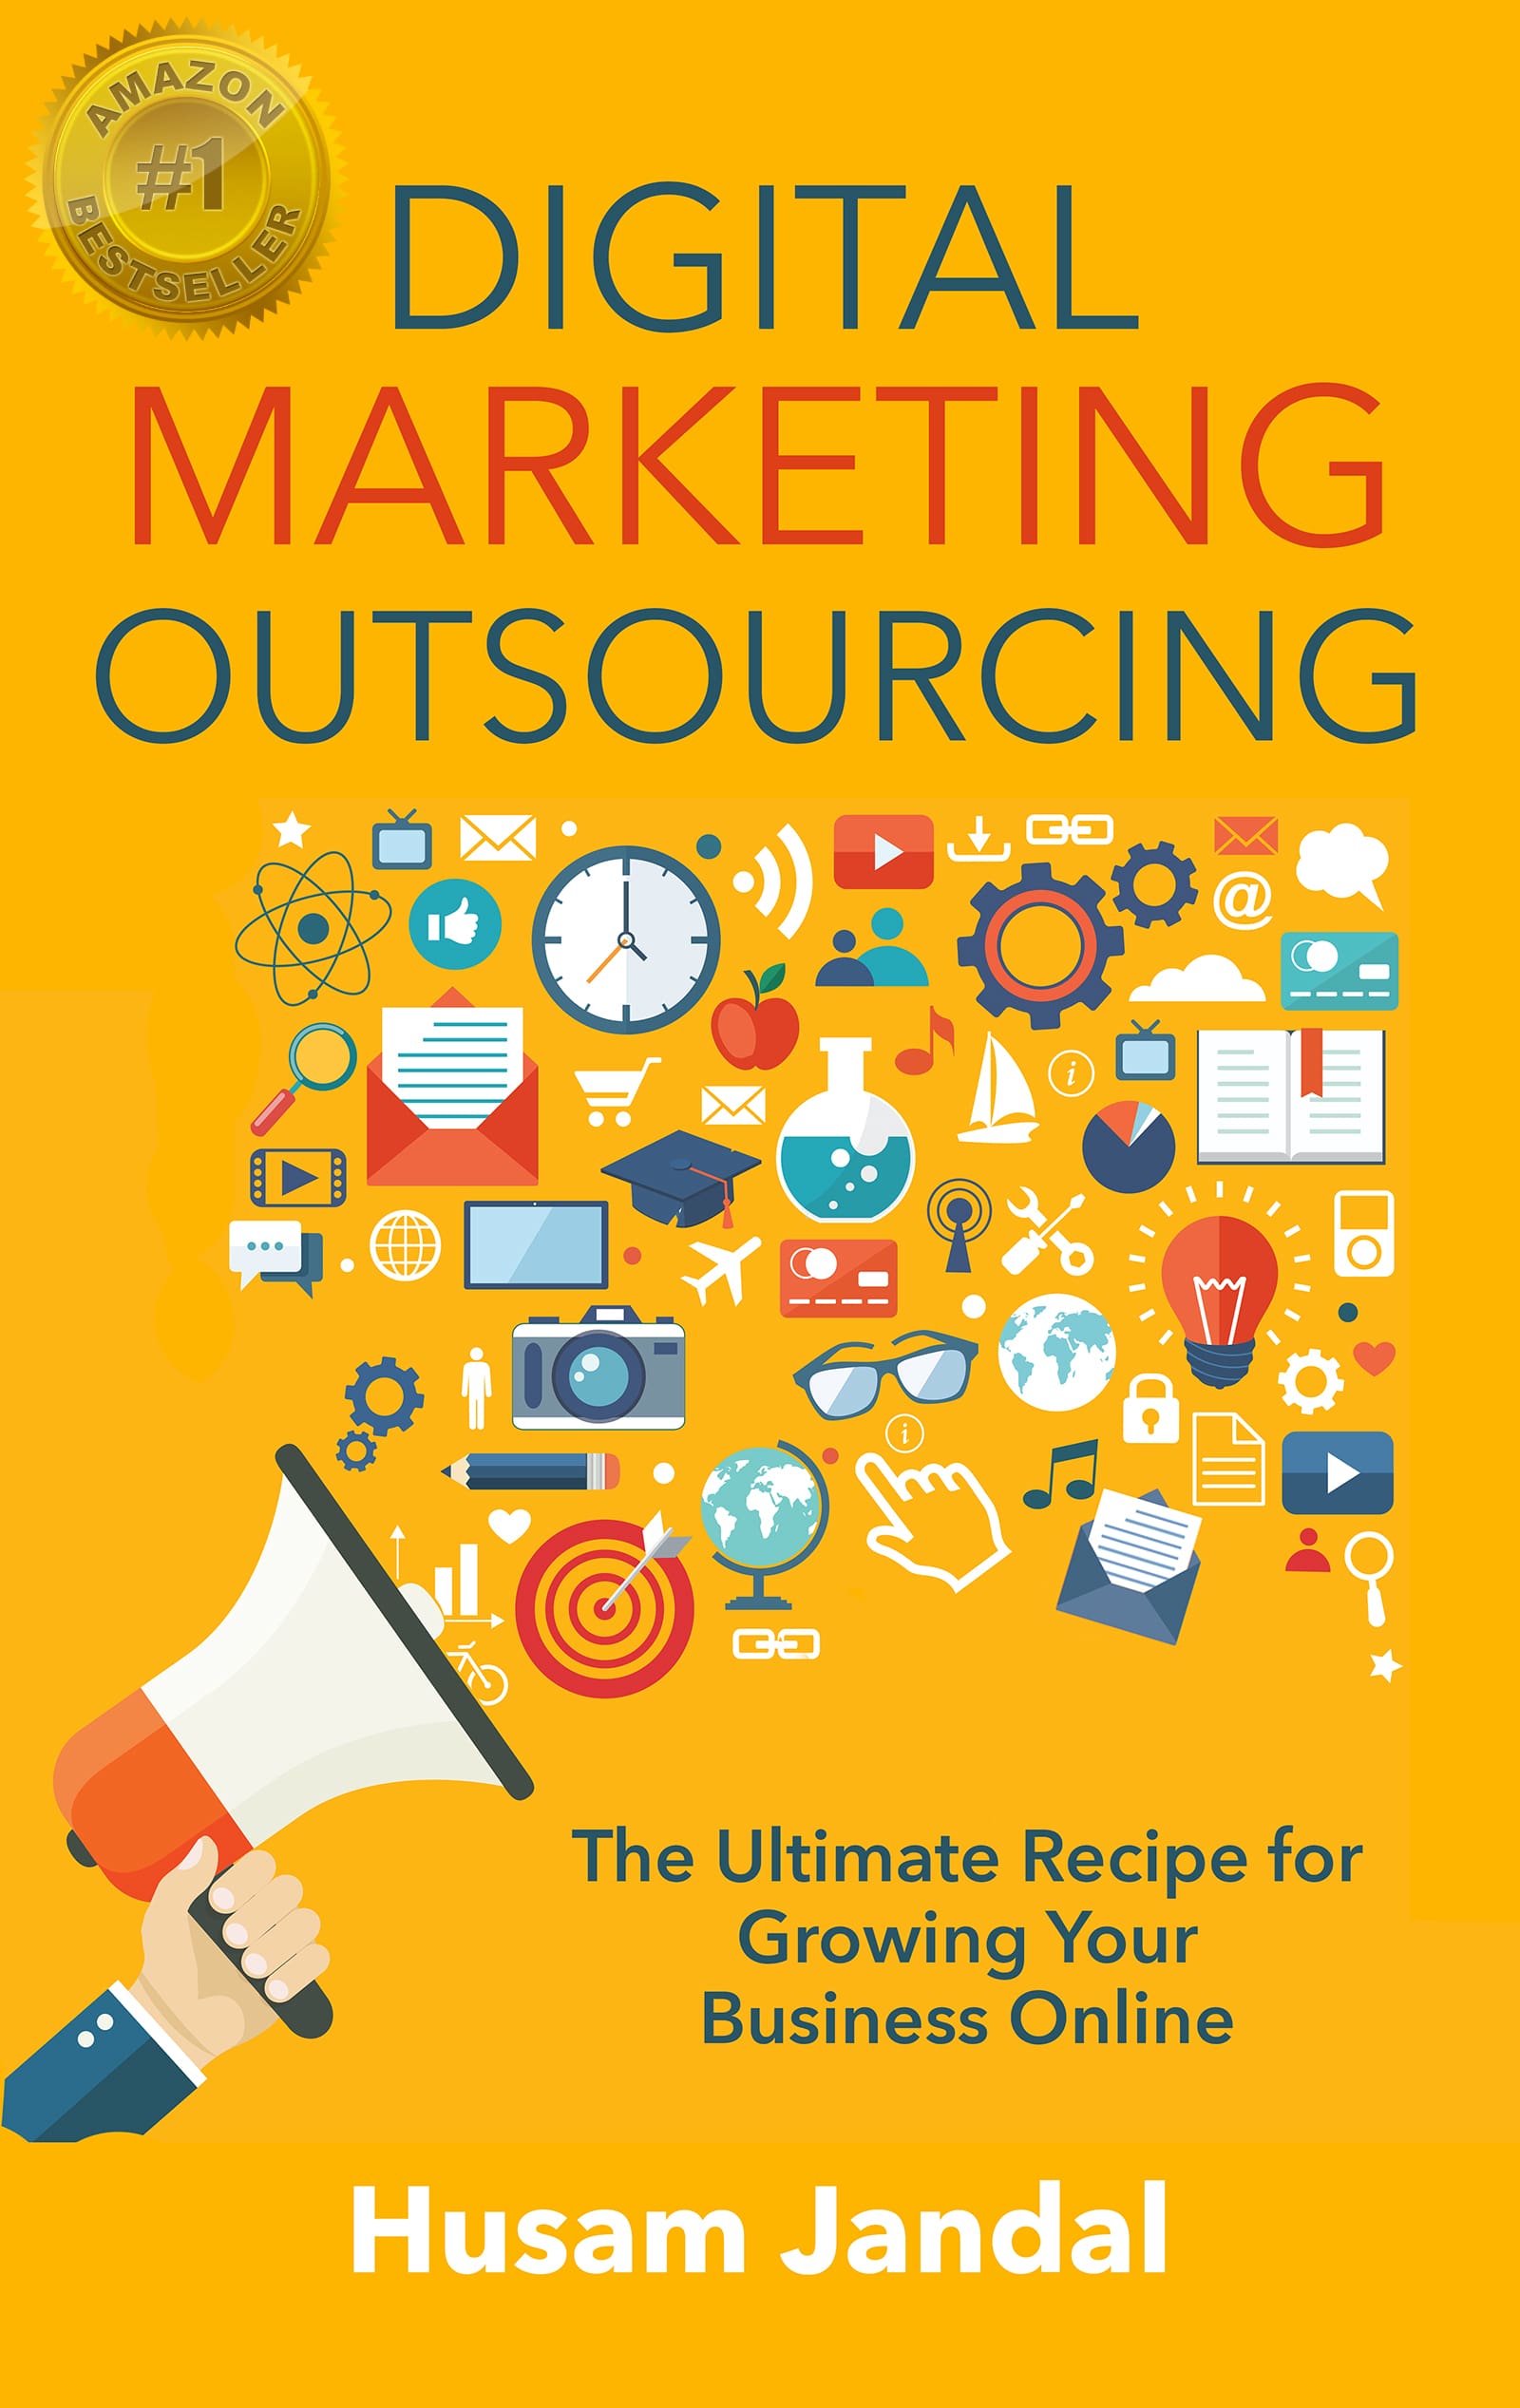 Digital-Marketing-Outsourcing_ebook-cover